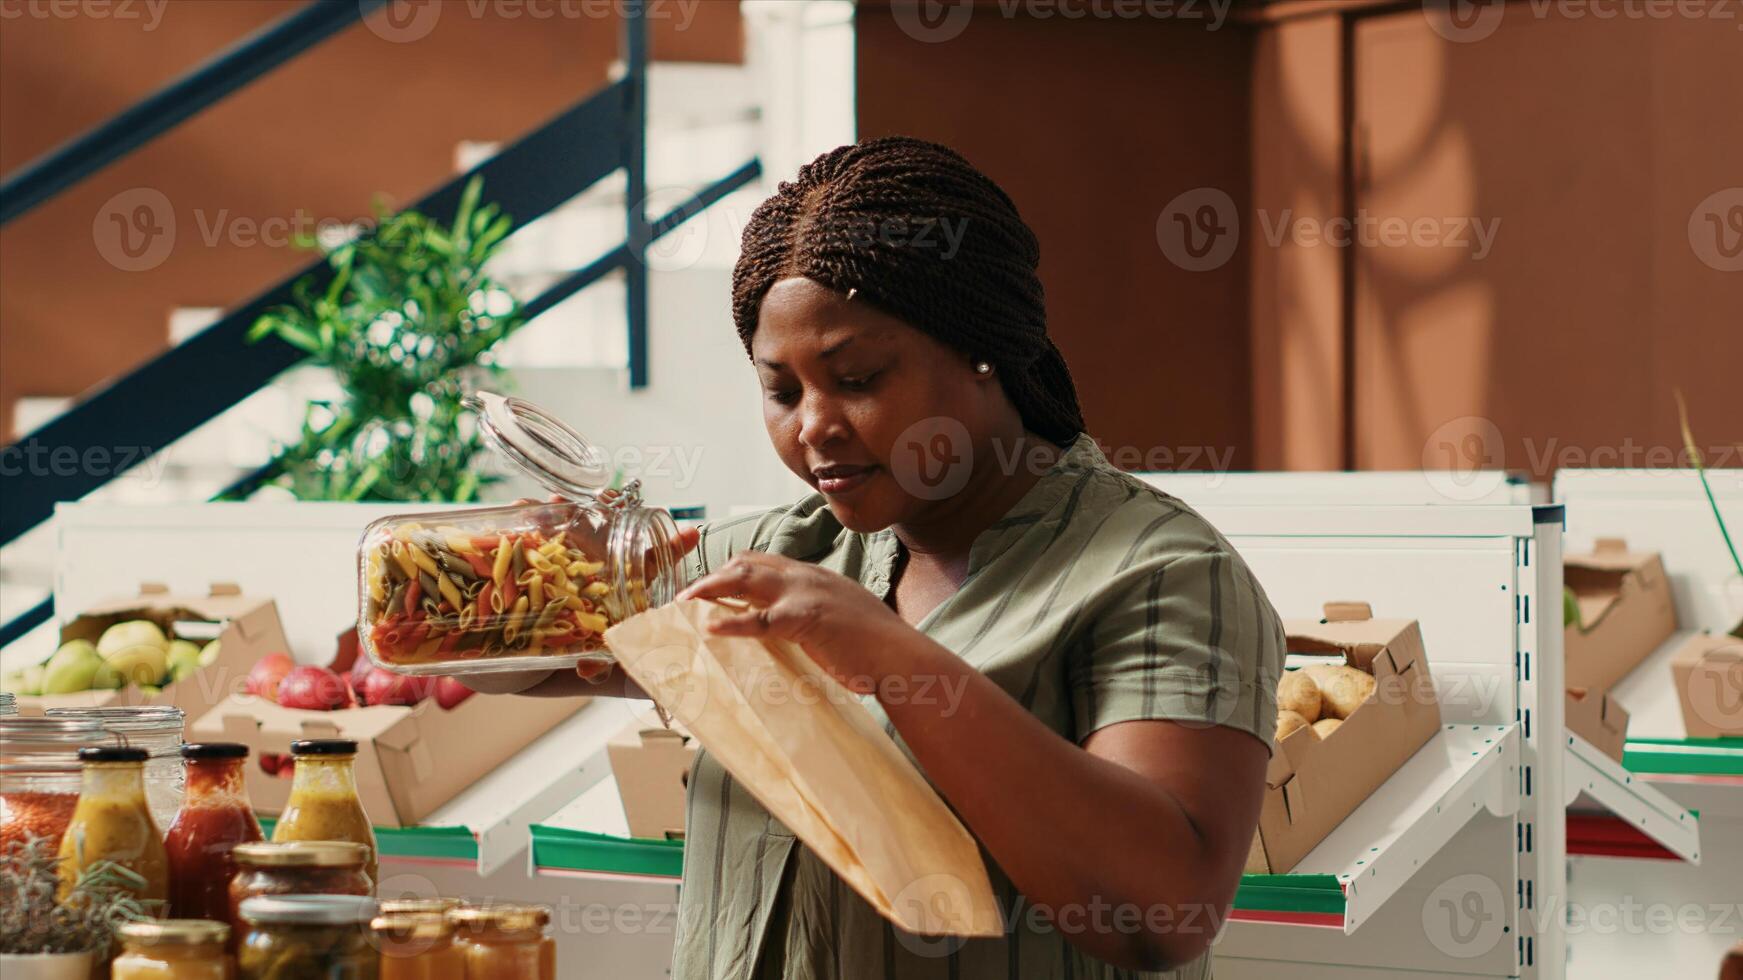 Customer pouring a type of pasta in ecological paper bag used to buy bulk products at zero waste store. Vegan woman searching for organic bio food alternatives at natural farming shop. photo